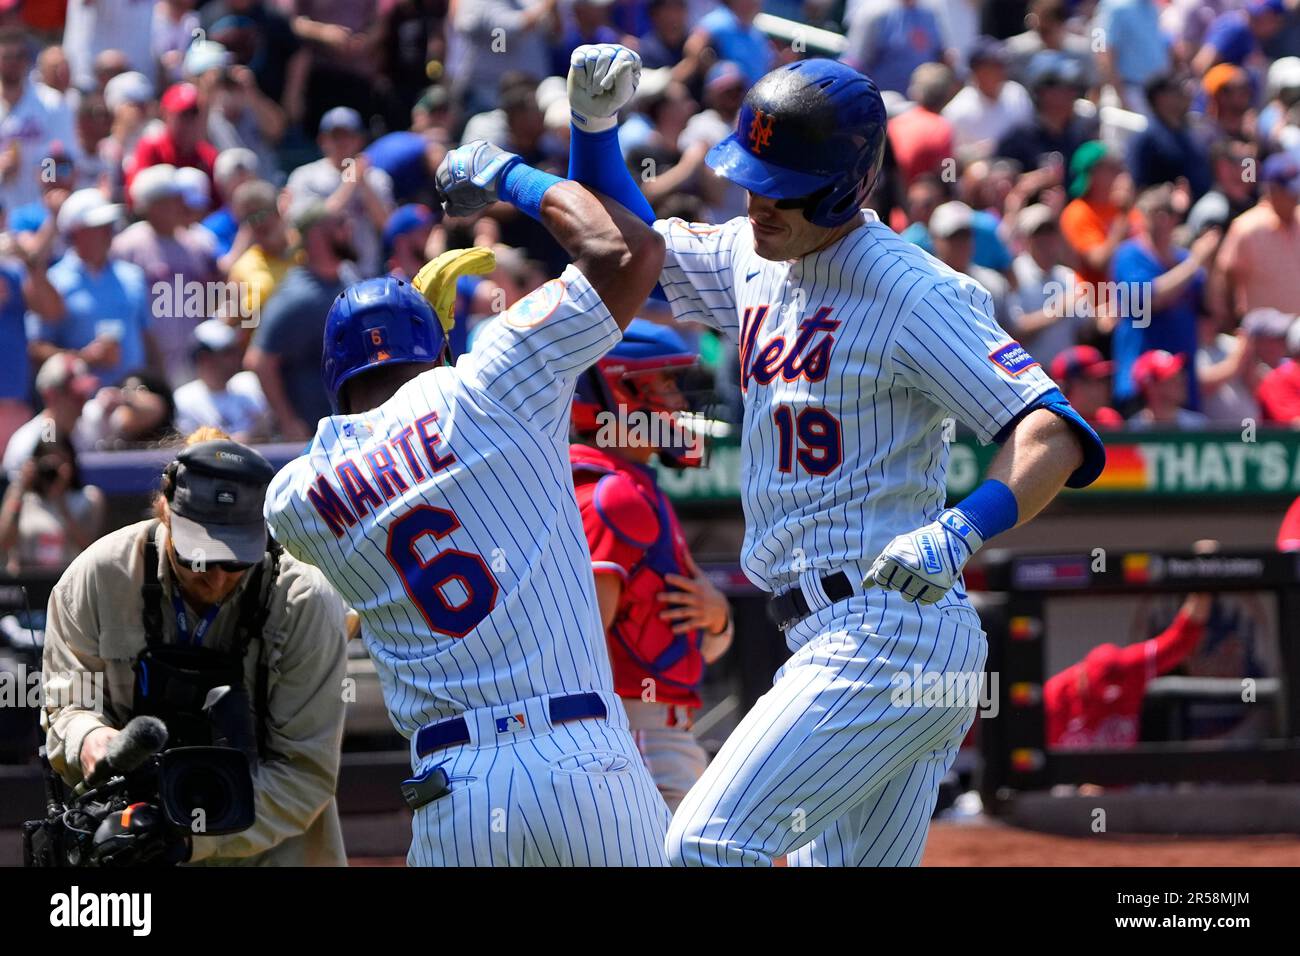 FLUSHING, NY - JUNE 01: New York Mets Right Fielder Starling Marte (6) arms  bumps New York Mets Left Fielder Mark Canha (19) to congratulate him for  hitting a home run during